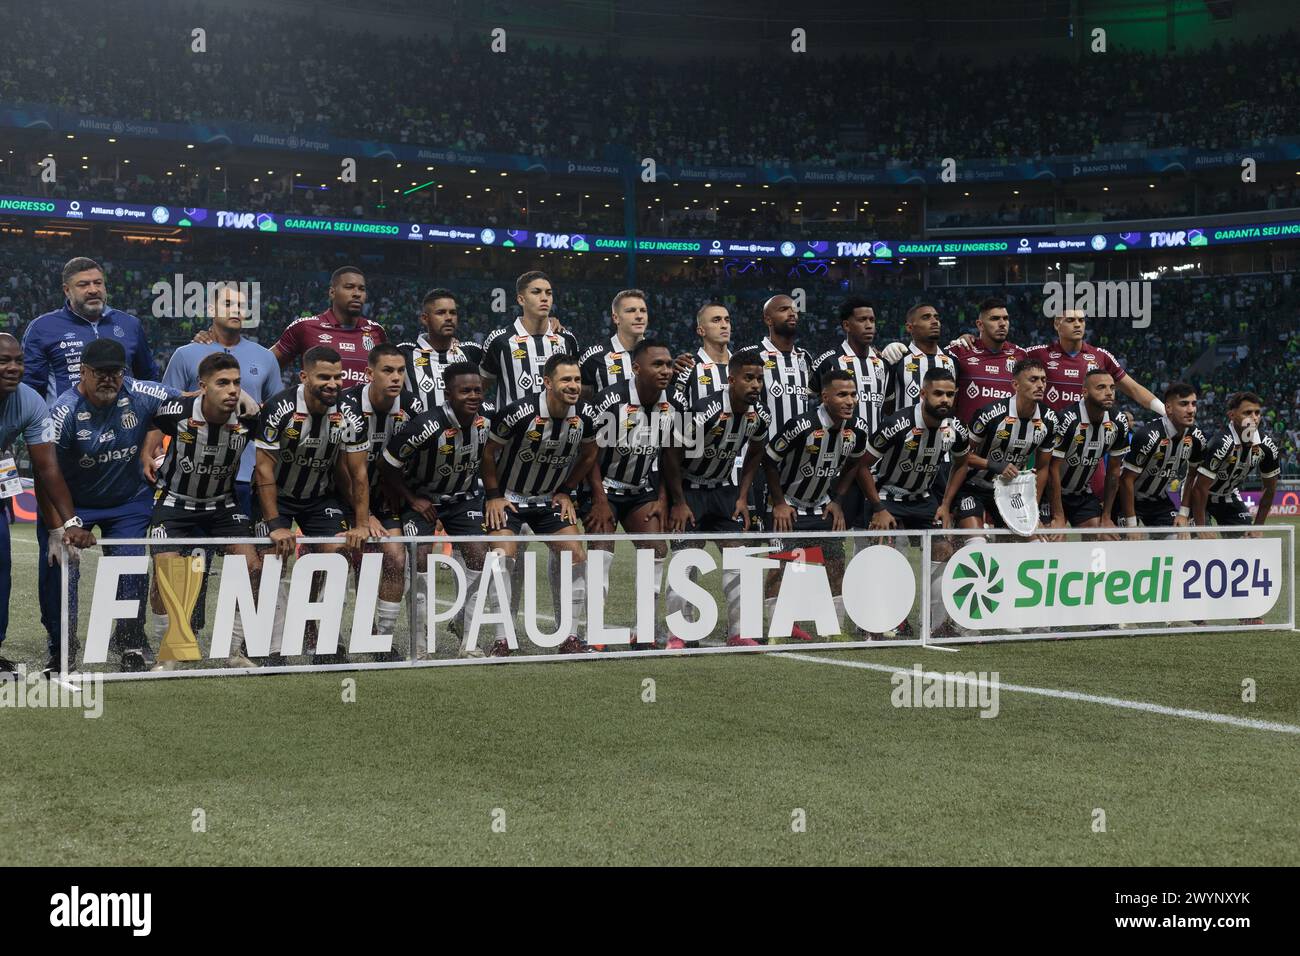 São Paulo (SP), March 7, 2024 - Football / Palmeiras vs Santos - Santos team posed for picture, during the match between Palmeiras and Santos, valid for the final of the Campeonato Paulista de Futebol, held at Allianz Parque on Sunday afternoon (7th). Credit: Vilmar Bannach/Alamy Live News. Stock Photo